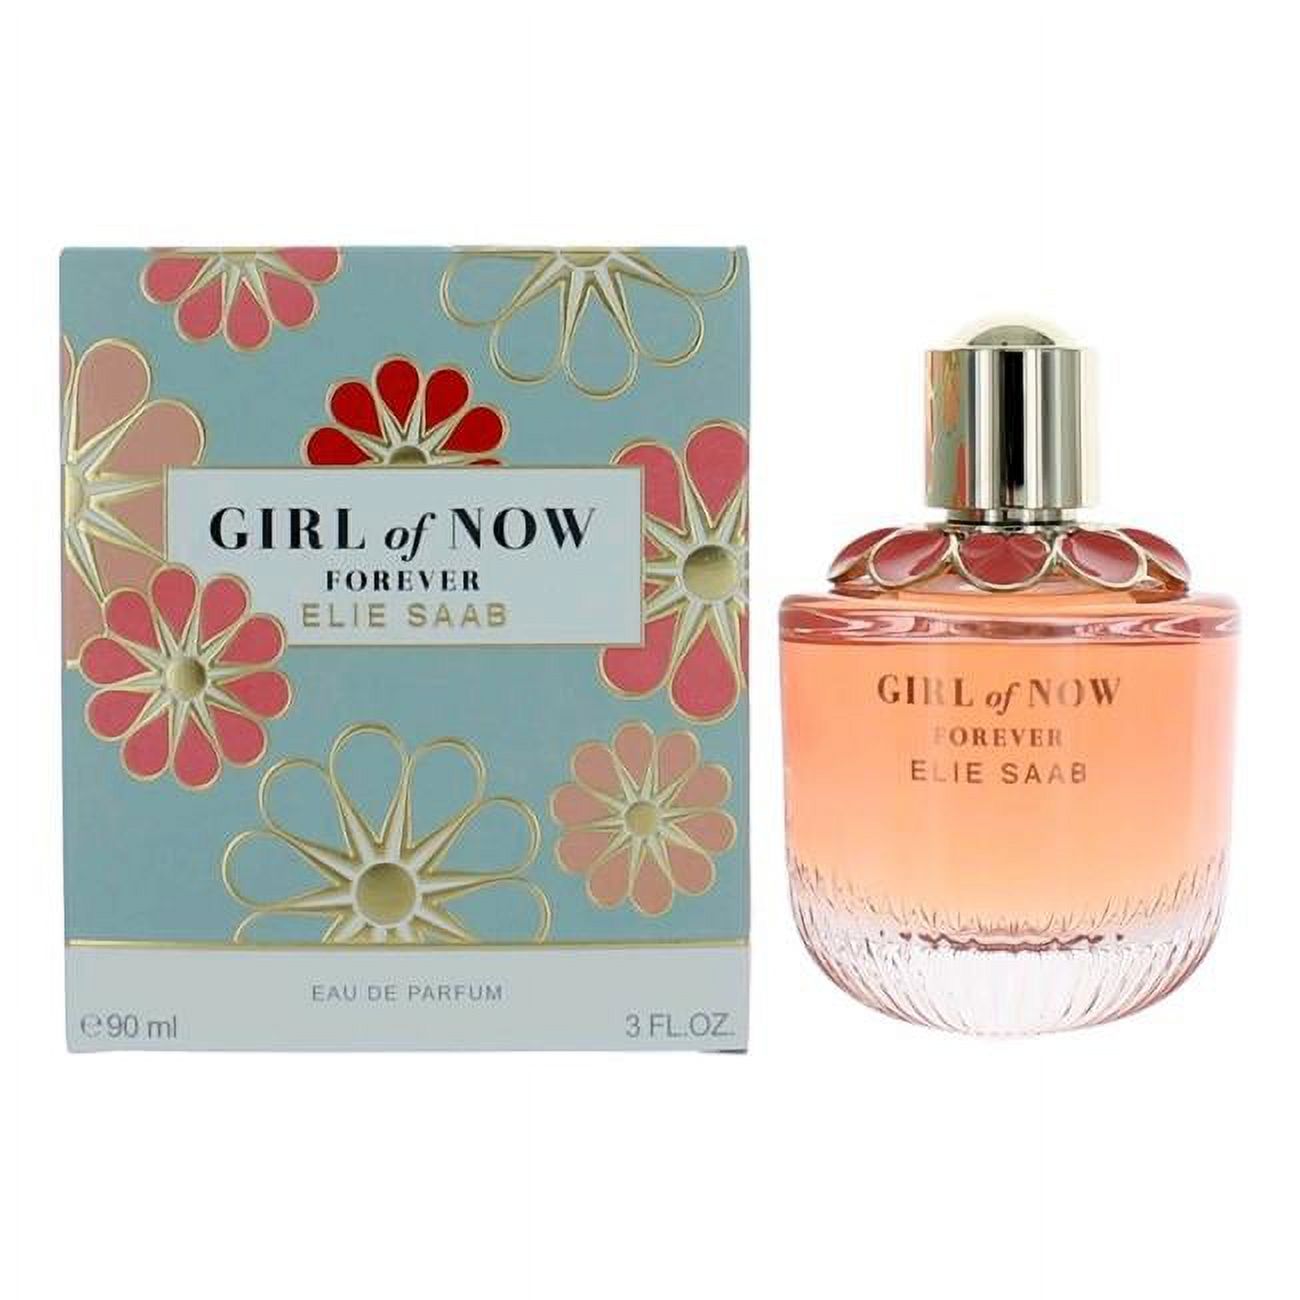 Girl of Now Forever by Elie Saab Eau De Parfum Spray 3 oz for Women - image 1 of 2